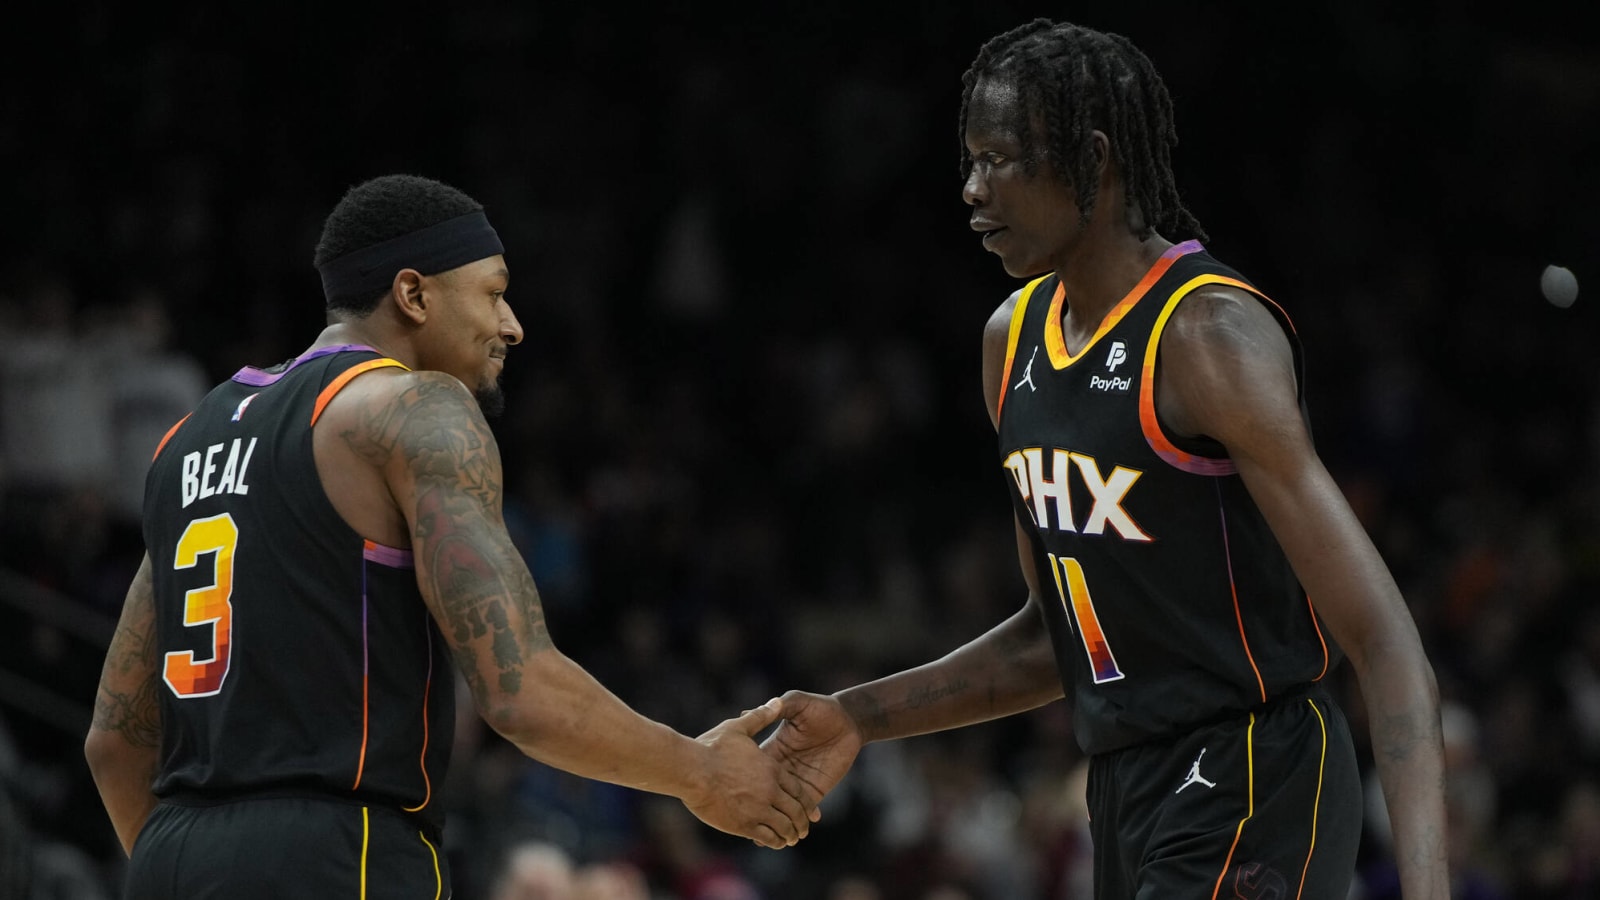 Shaquille O’Neal is loving Bol Bol’s recent outburst